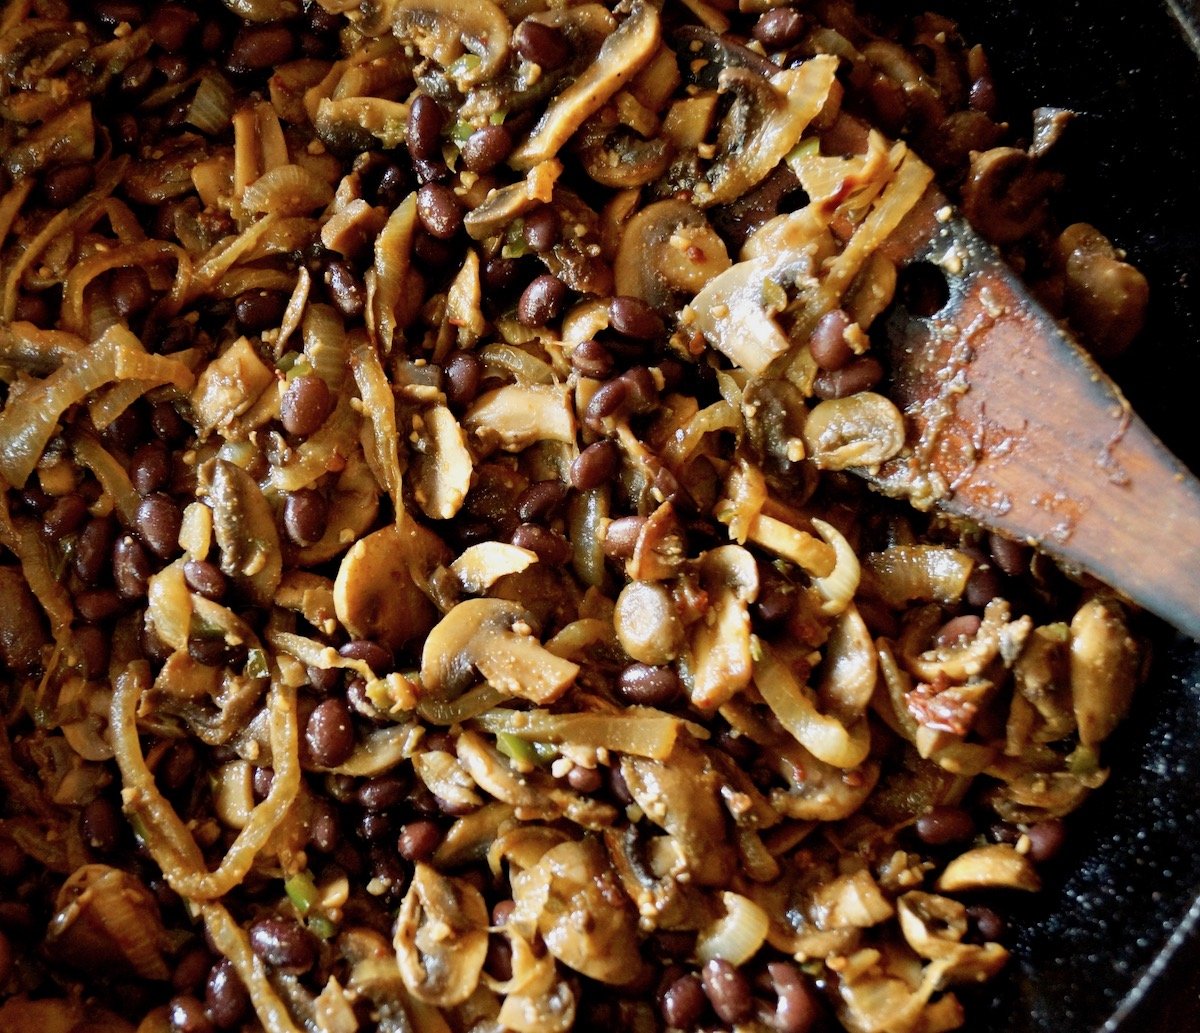 Sauteed onions and mushrooms in saute pan with wooden spatula.